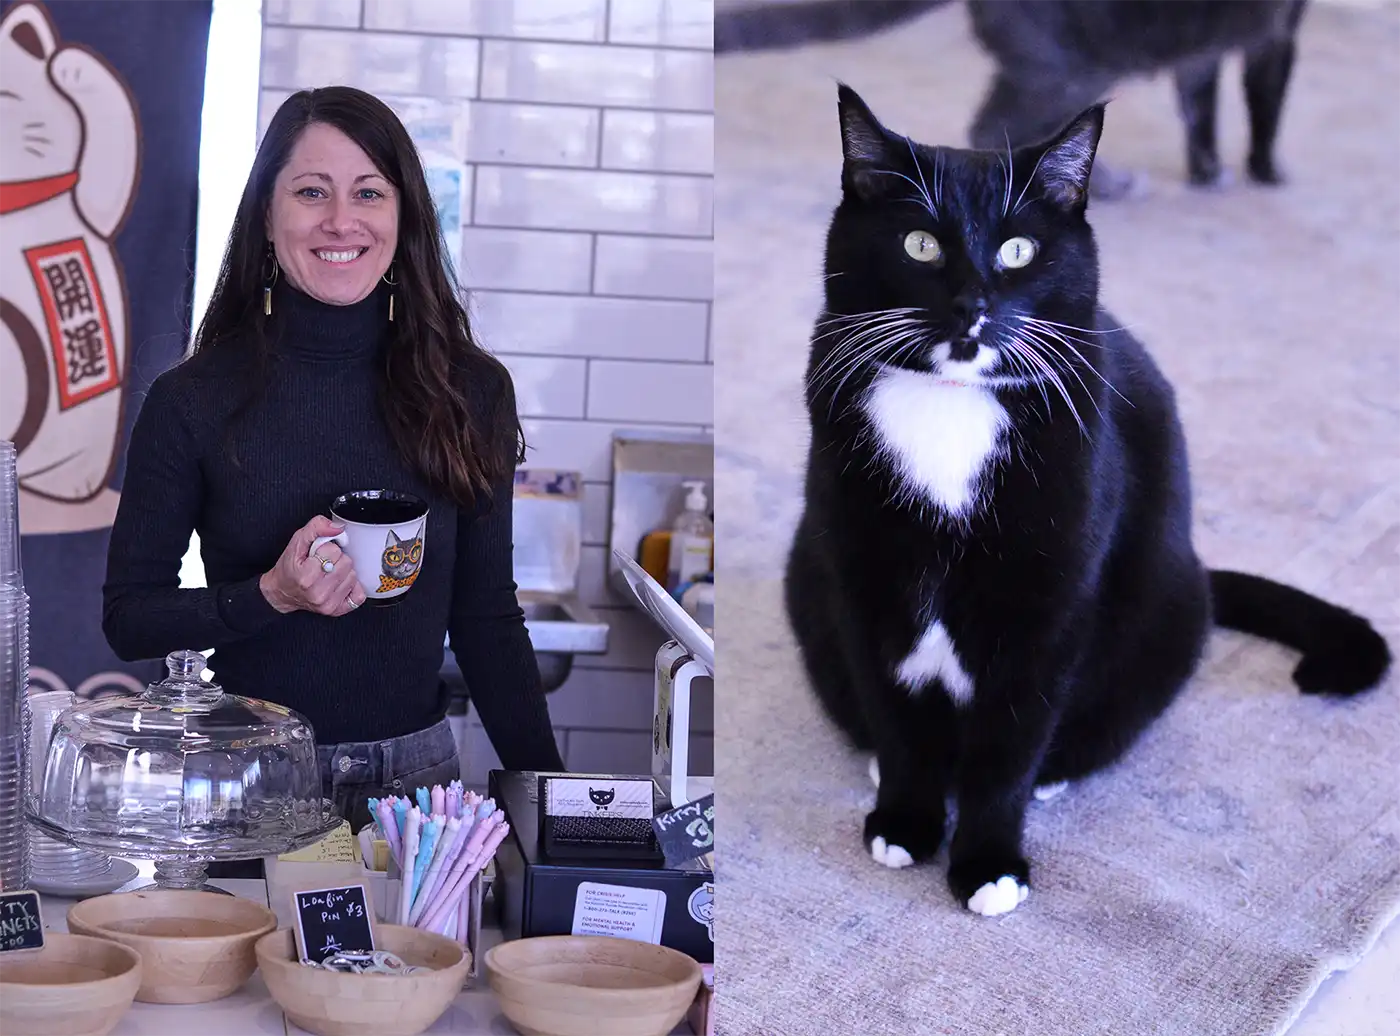 Lisa Totzke opened Tinker’s Cat Cafe in 2017 and has since facilitated 408 adoptions of vaccinated, microchipped, spayed and neutered cats.